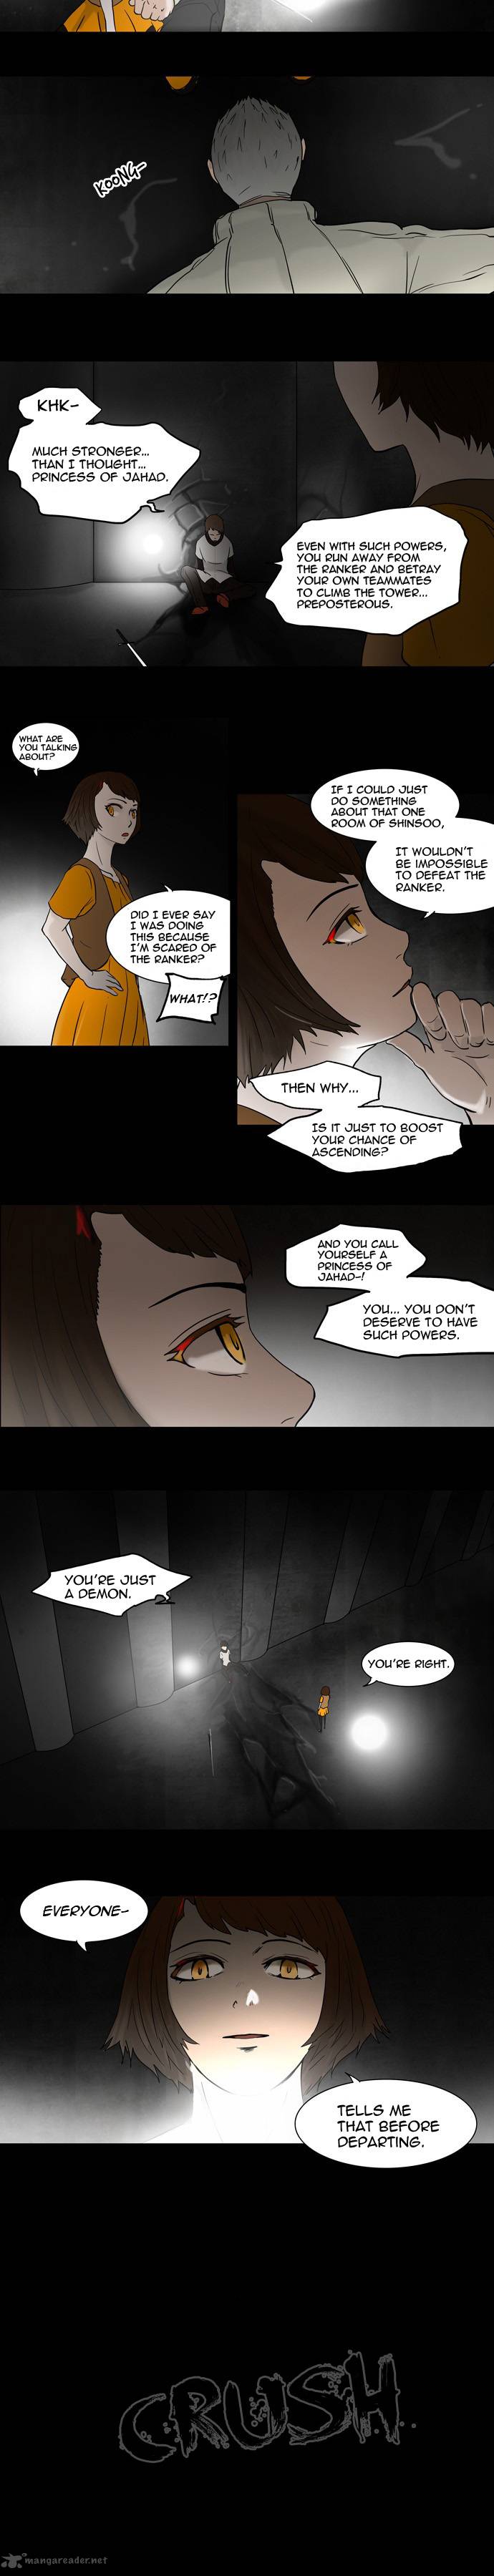 Tower Of God 49 4